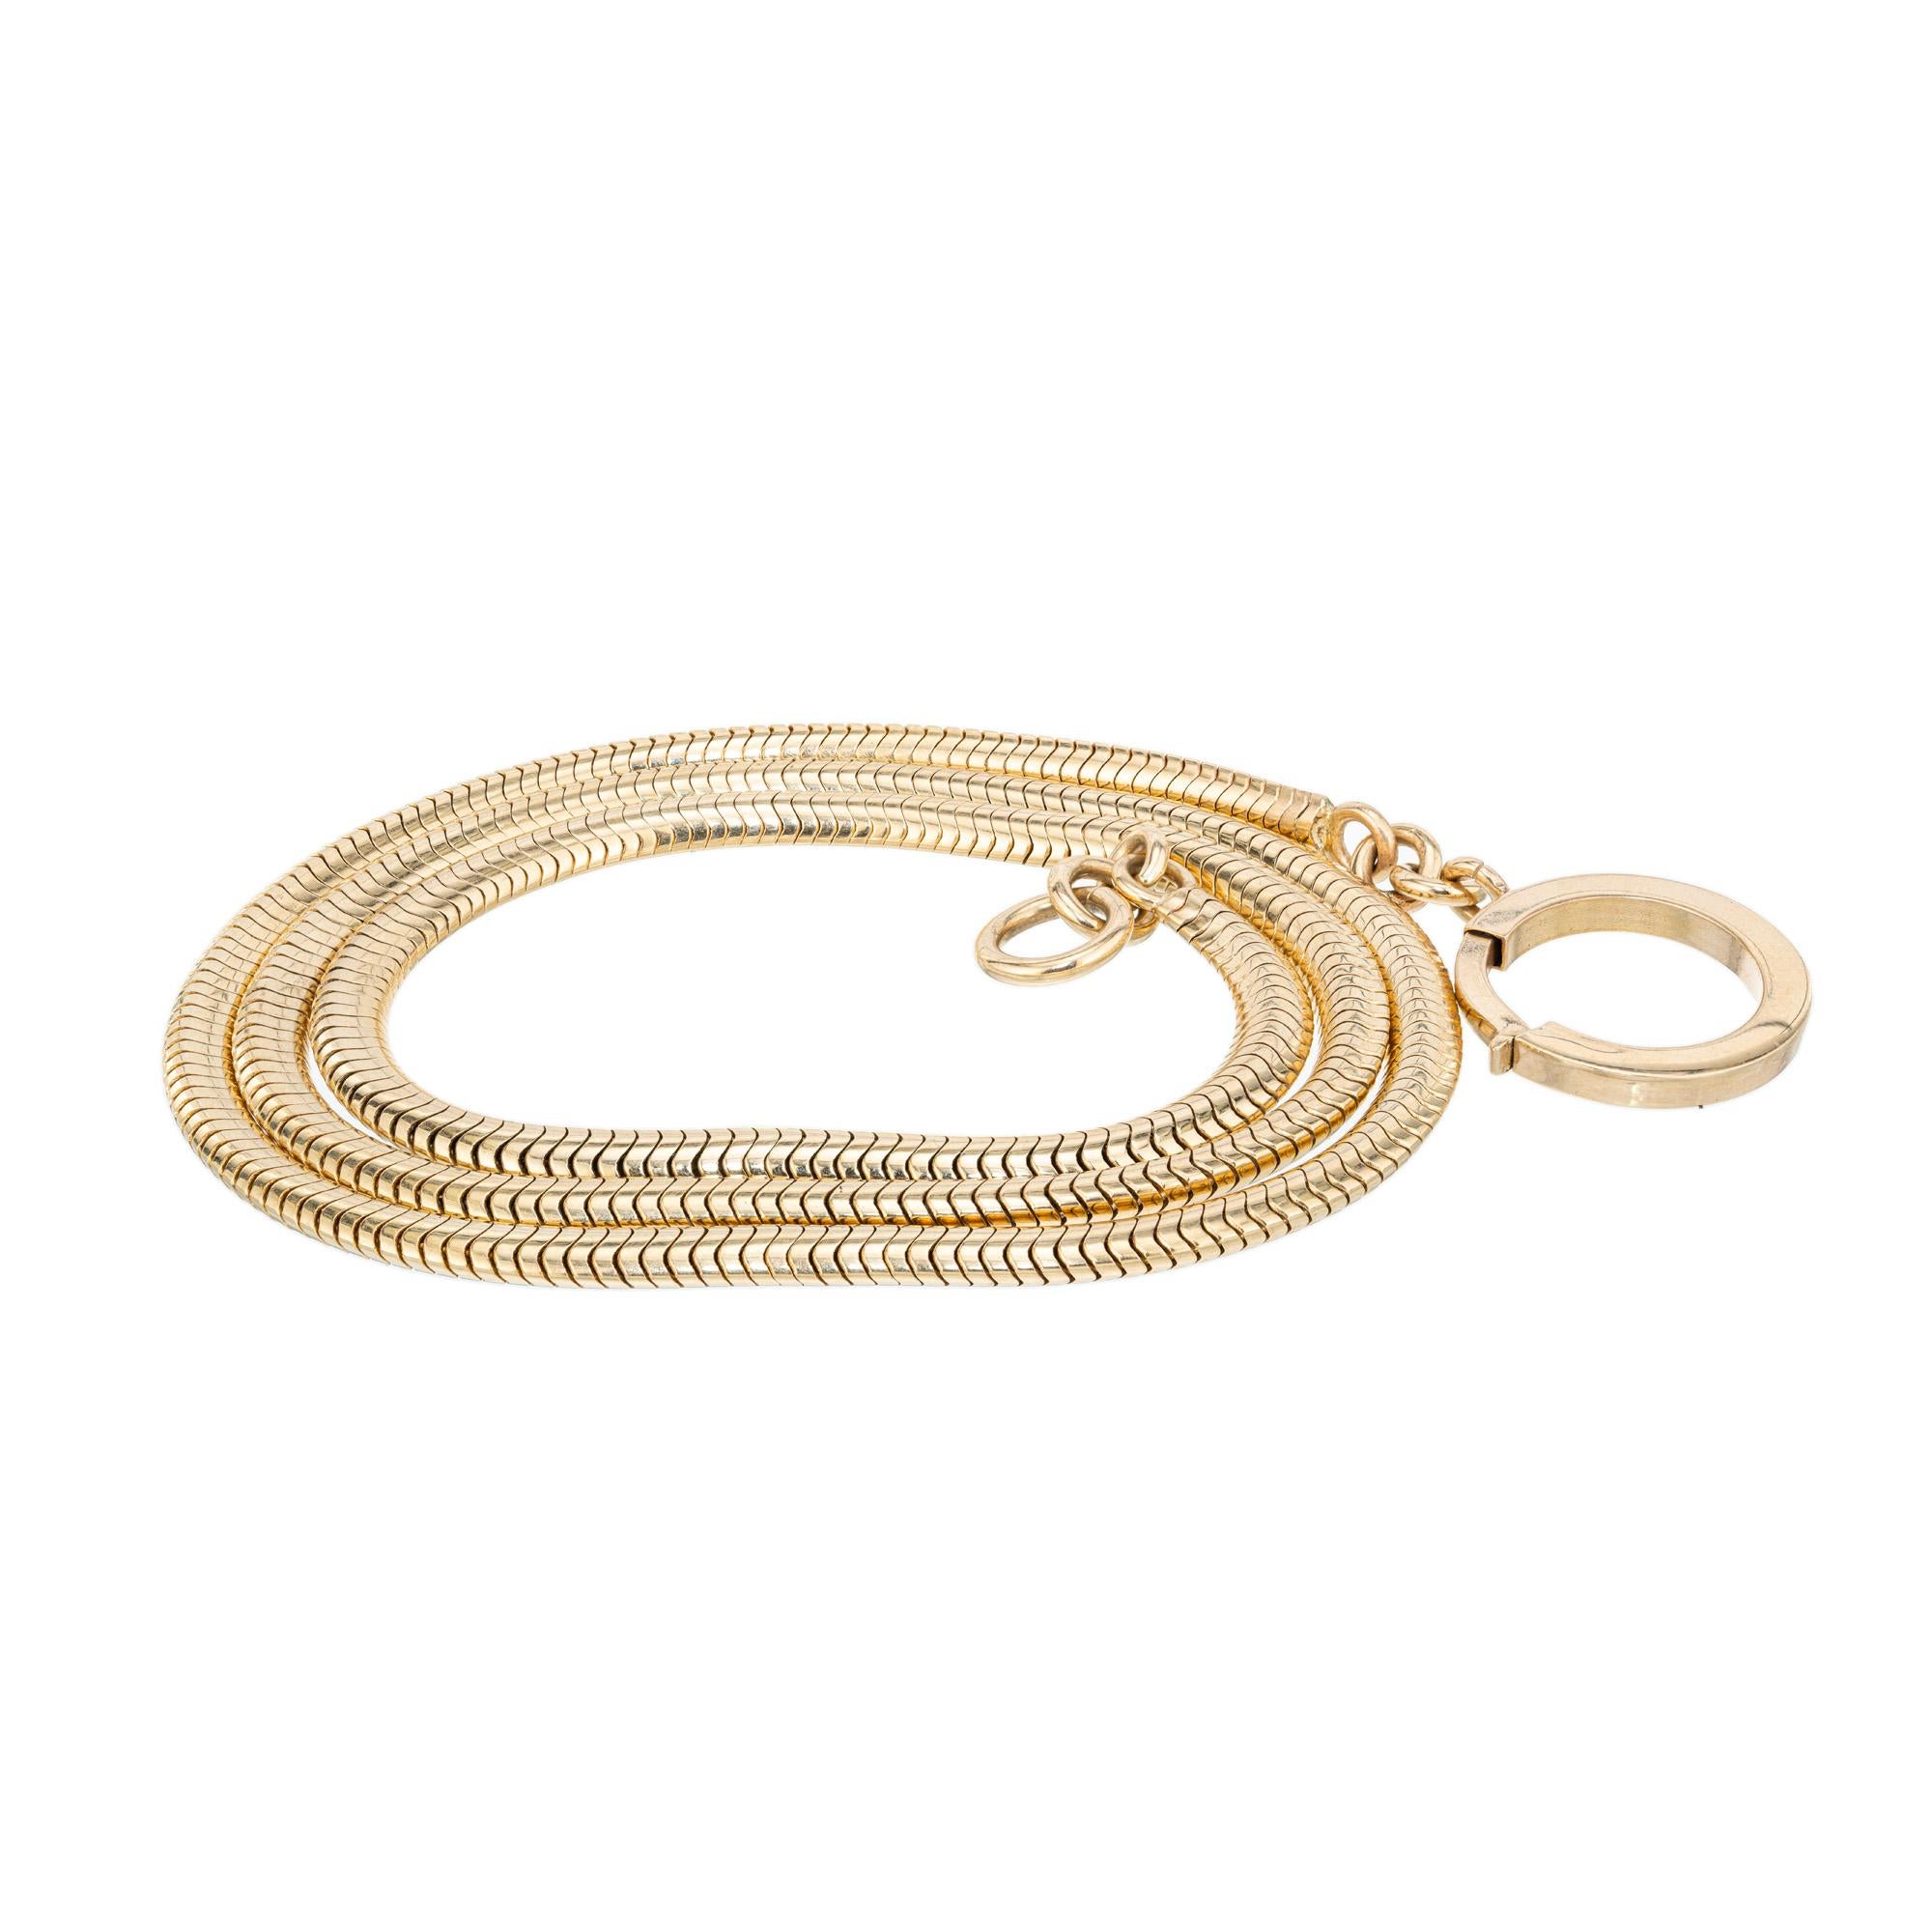 Vintage 1950's 20 Inch 4mm wide snake chain. 3D oval shape. Sport ring and jump ring ends. Suitable for a watch chain or necklace.

14k yellow gold 
Stamped: 14k
35.4 grams
Width: 4mm
Thickness/depth: 2.5mm
Chain: 20 Inches

Please Note, we